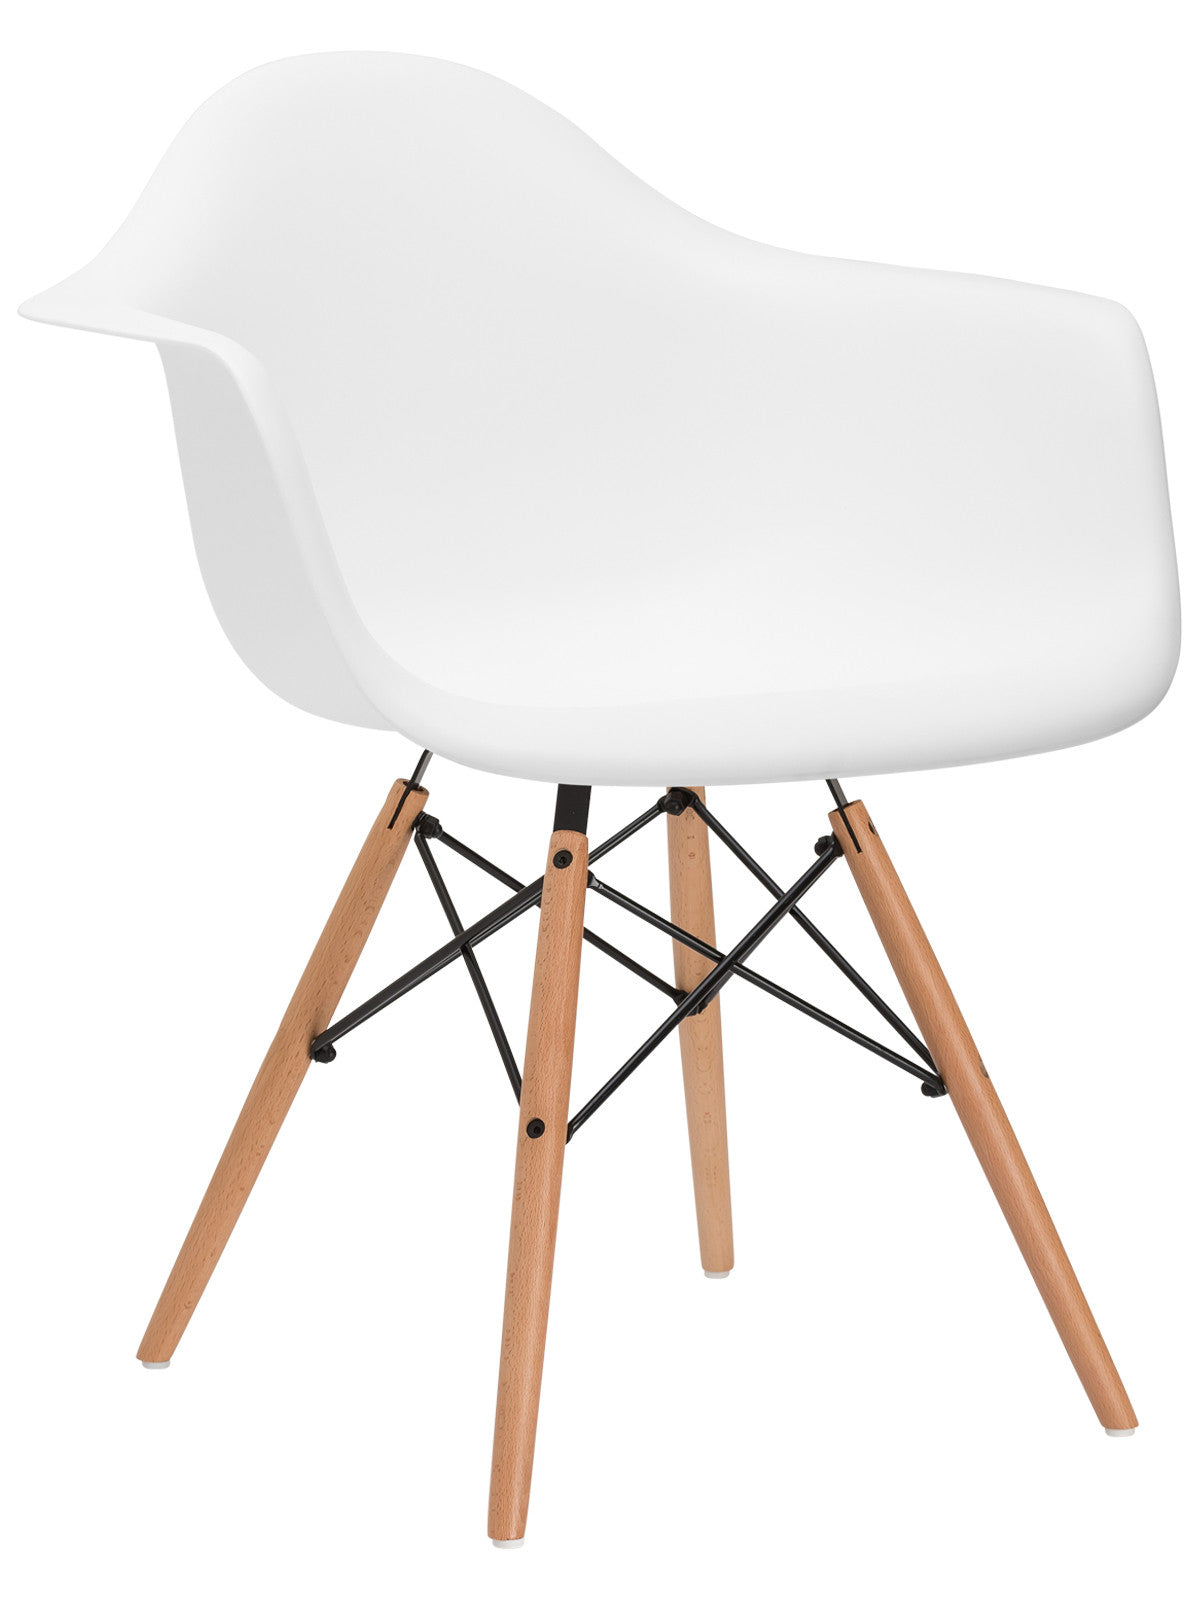 The Original Easy Style Side Chair Easymodernfurniture